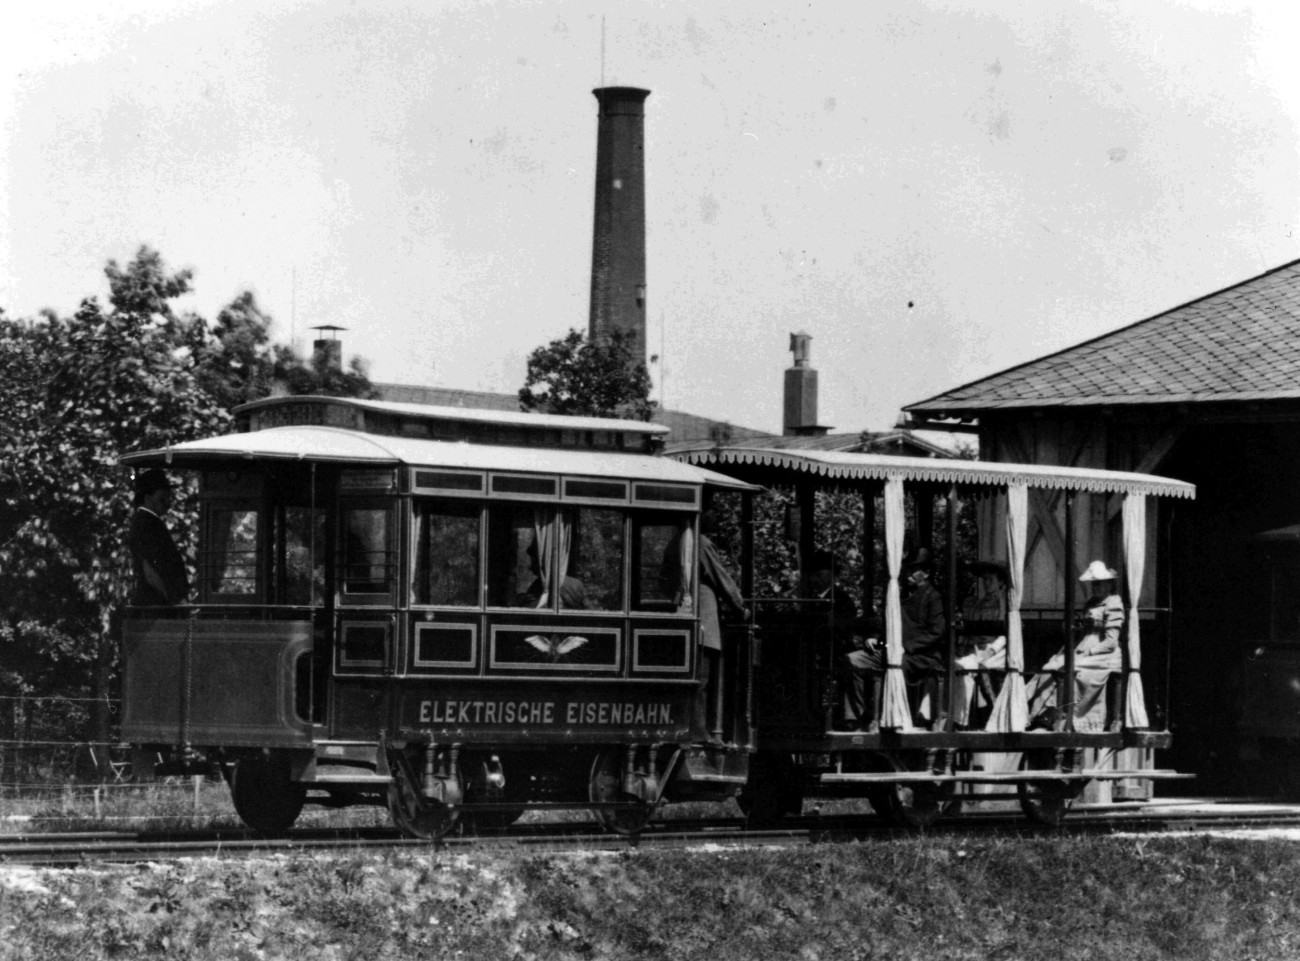 The Schuckert plant supplied an electric tram for the city of Munich. It went into operation in 1886.